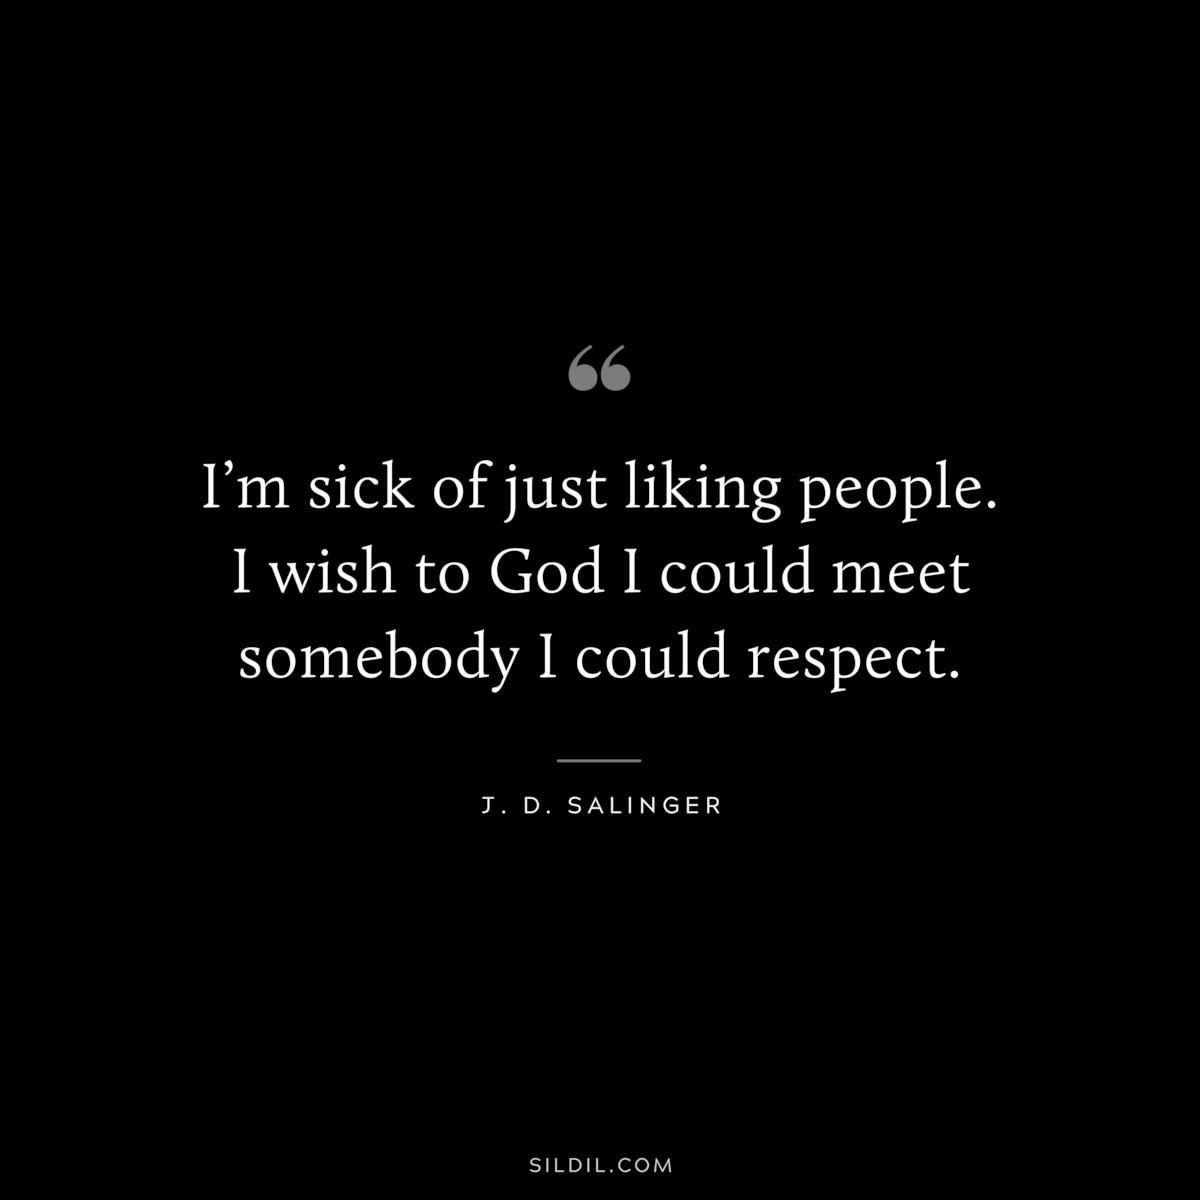 I’m sick of just liking people. I wish to God I could meet somebody I could respect. — J. D. Salinger